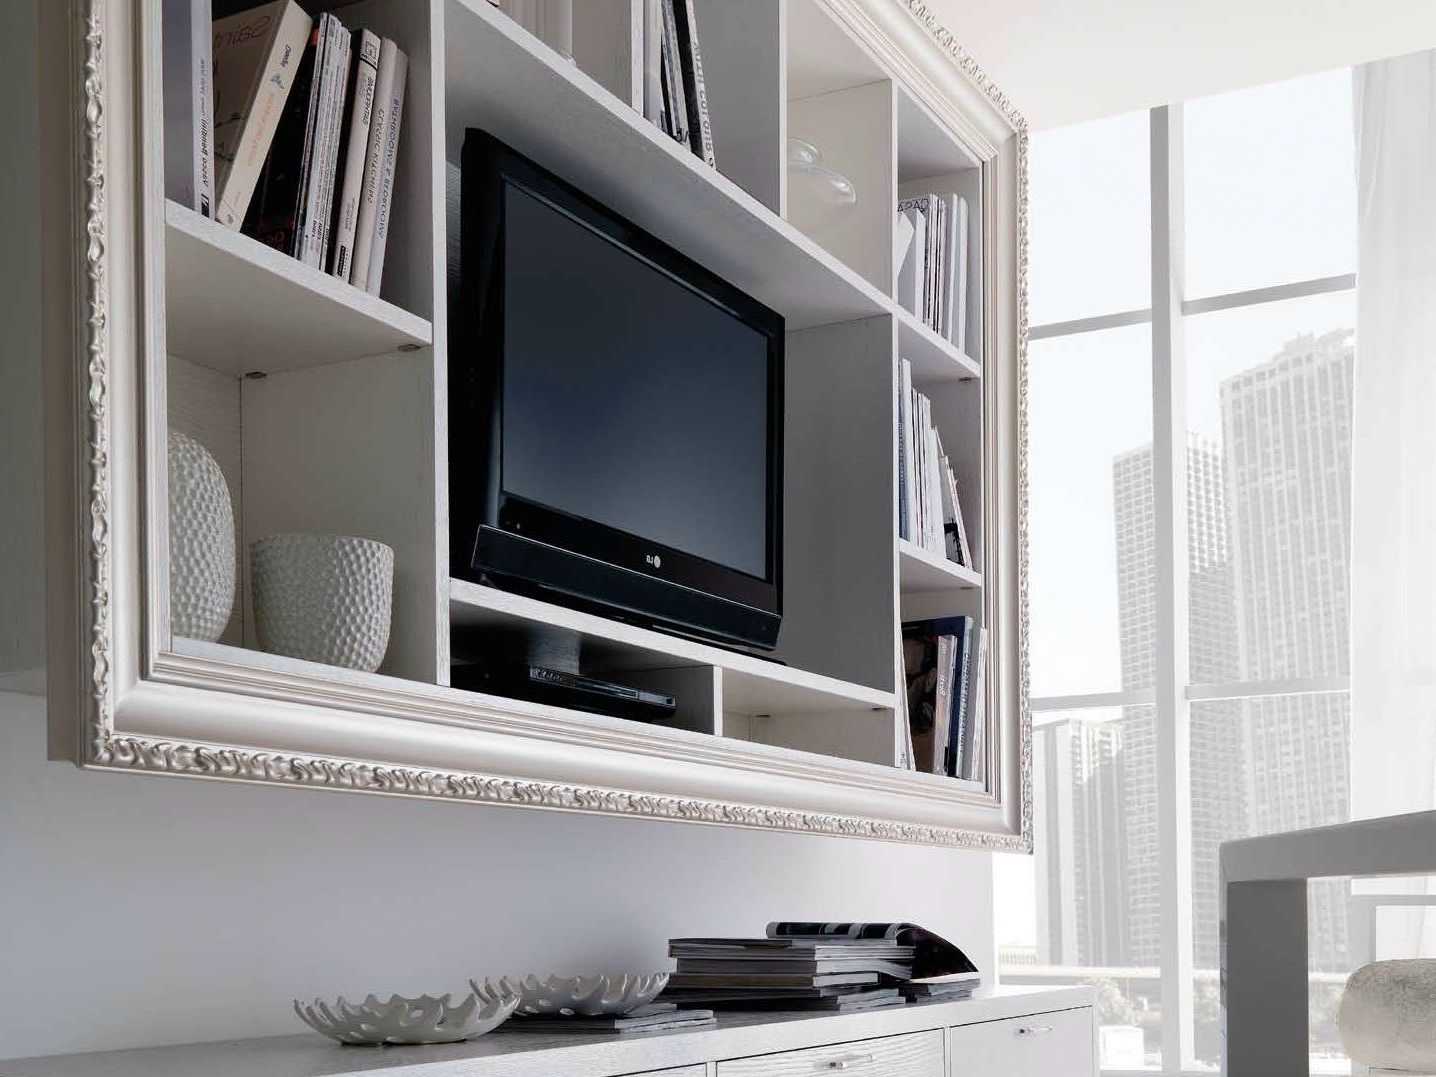 Famous White Wall Mounted Tv Stands With Regard To Cool White Varnished Wooden Wall Mounted Tv Cabinet Also Shelf As (View 15 of 20)